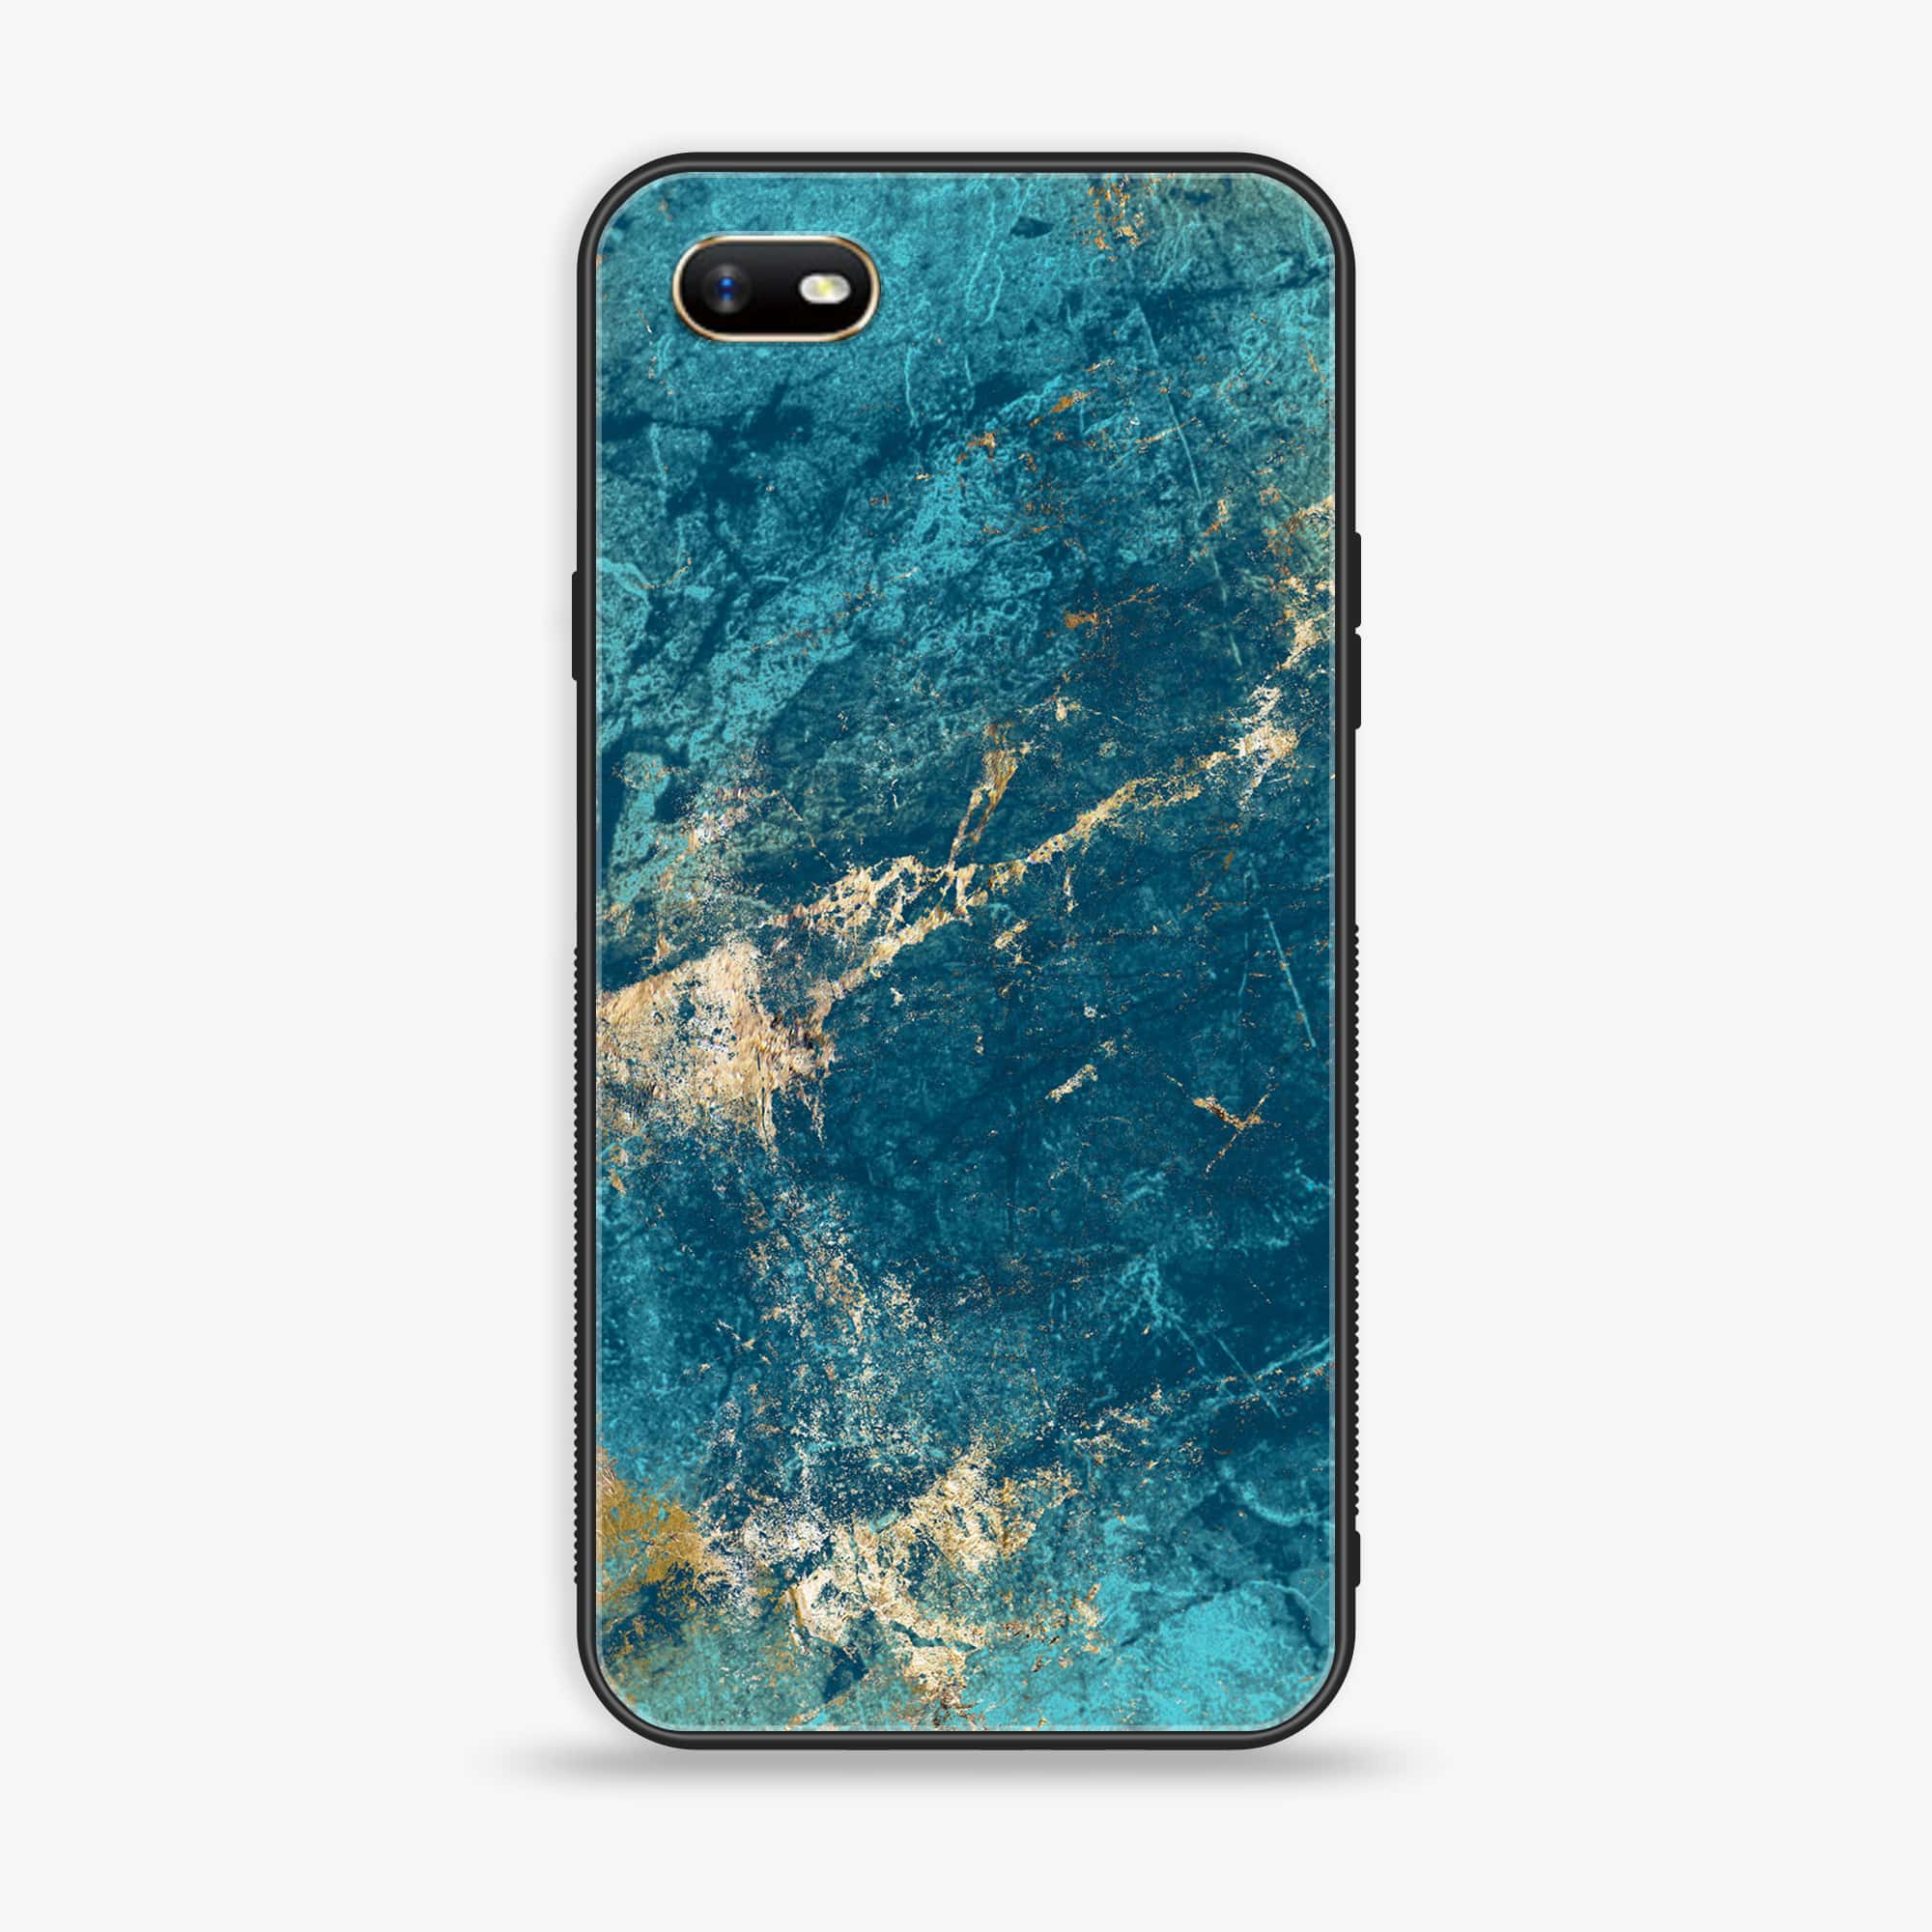 Oppo A1k - Blue Marble 2.0 Series - Premium Printed Glass soft Bumper shock Proof Case